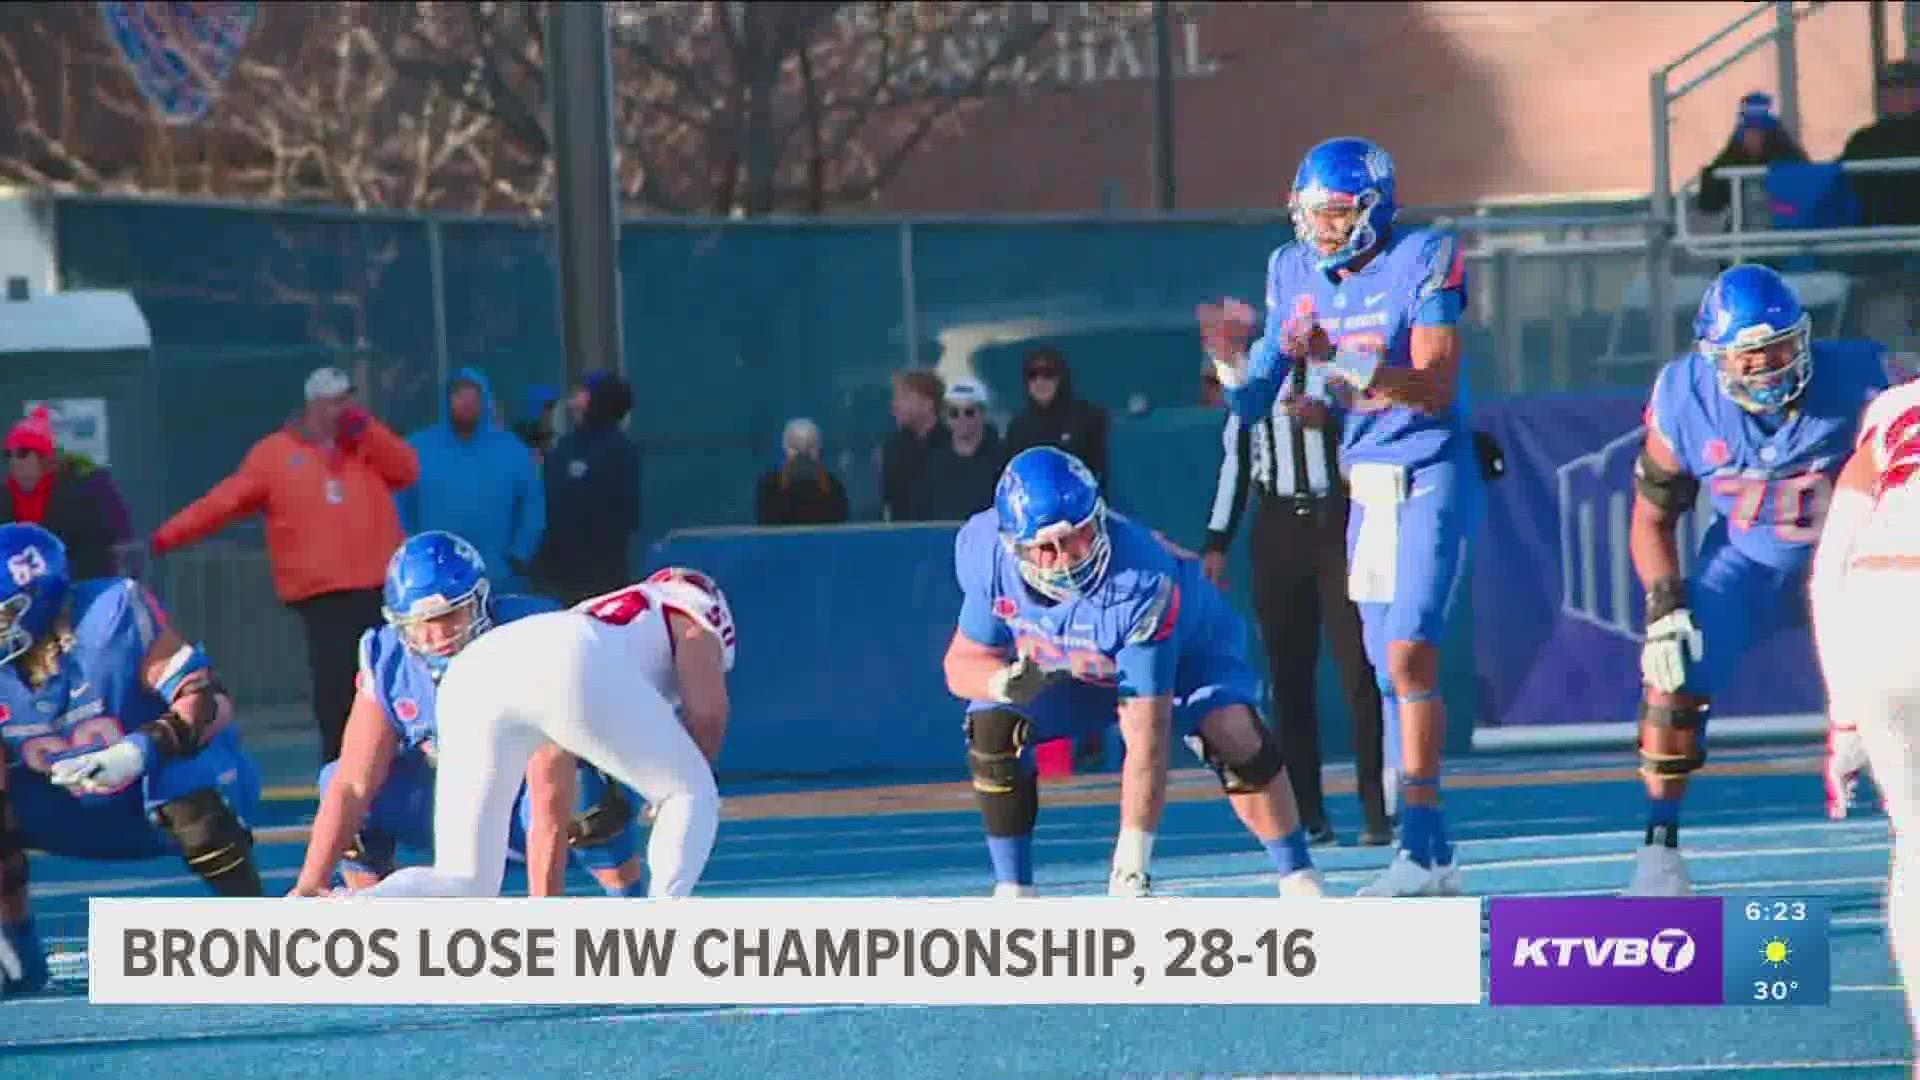 Boise State's hopes of a Mountain West title fell short Saturday on The Blue, as Fresno State handed the Broncos their first conference loss of 2022.